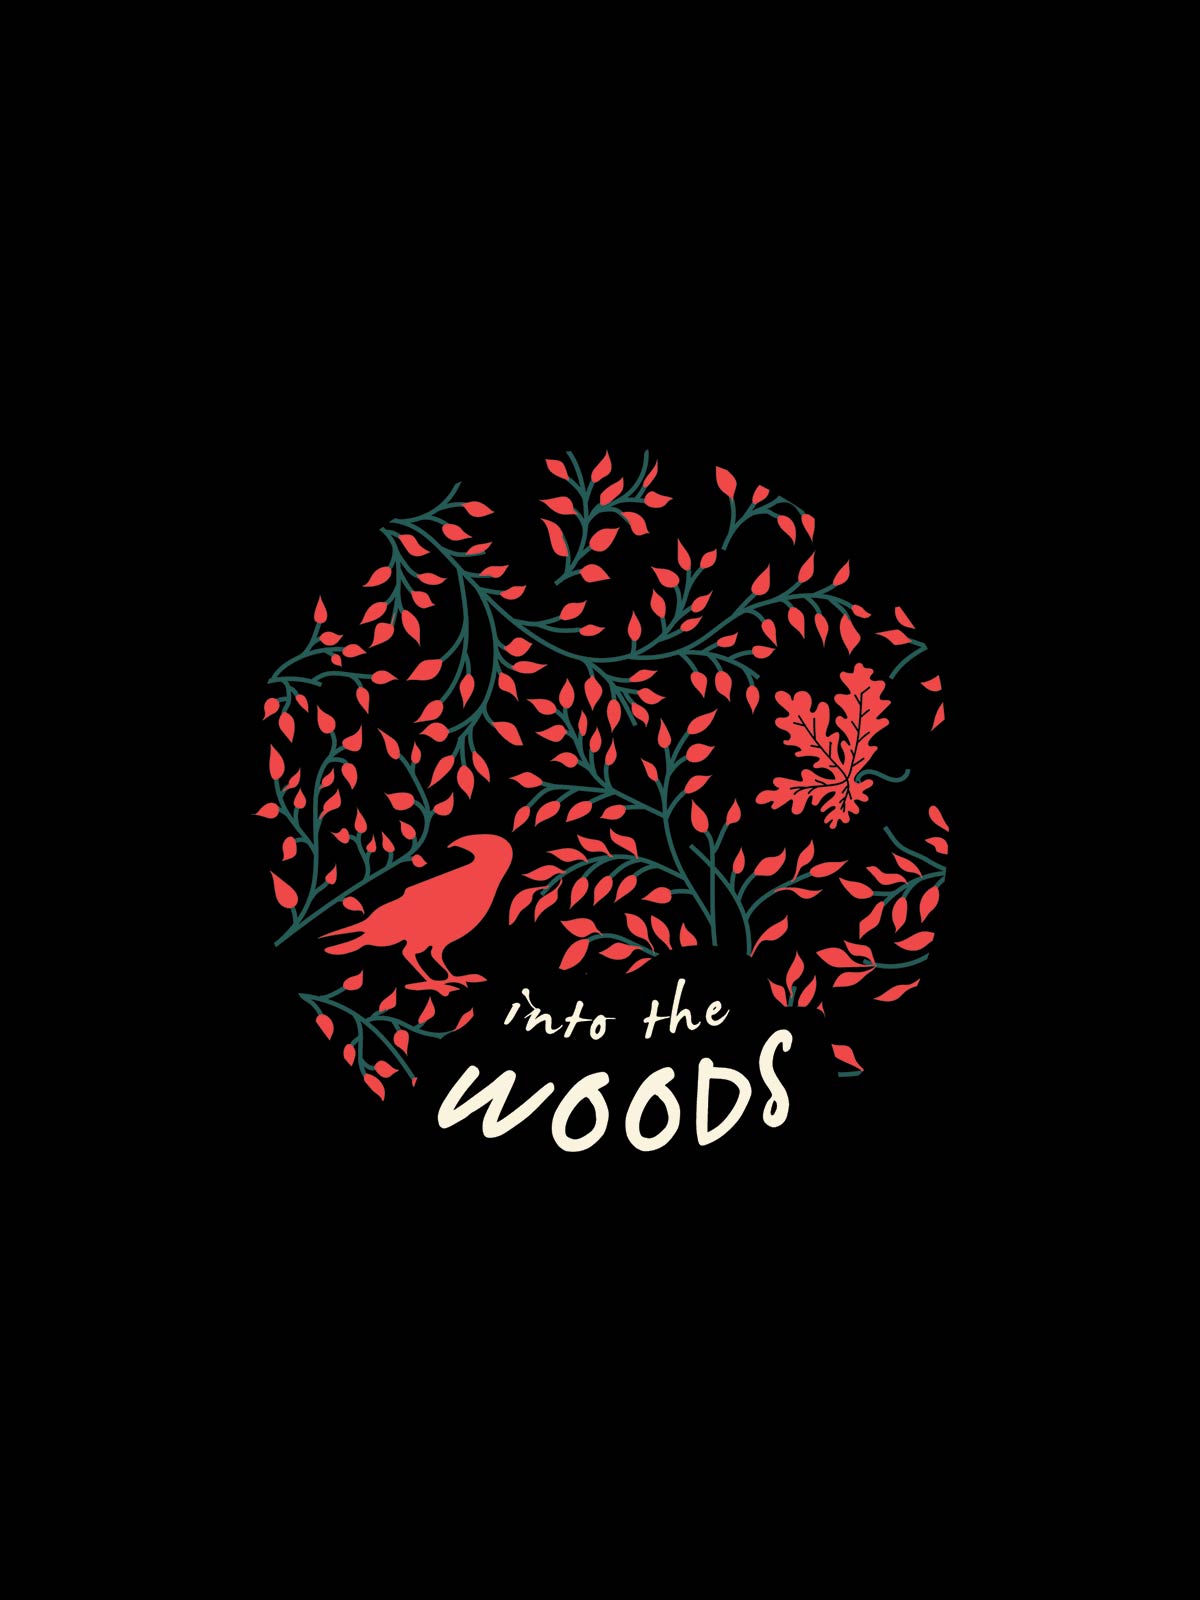 Into the woods Printed Cotton Hoodie for Men & Women by shopghumakkad